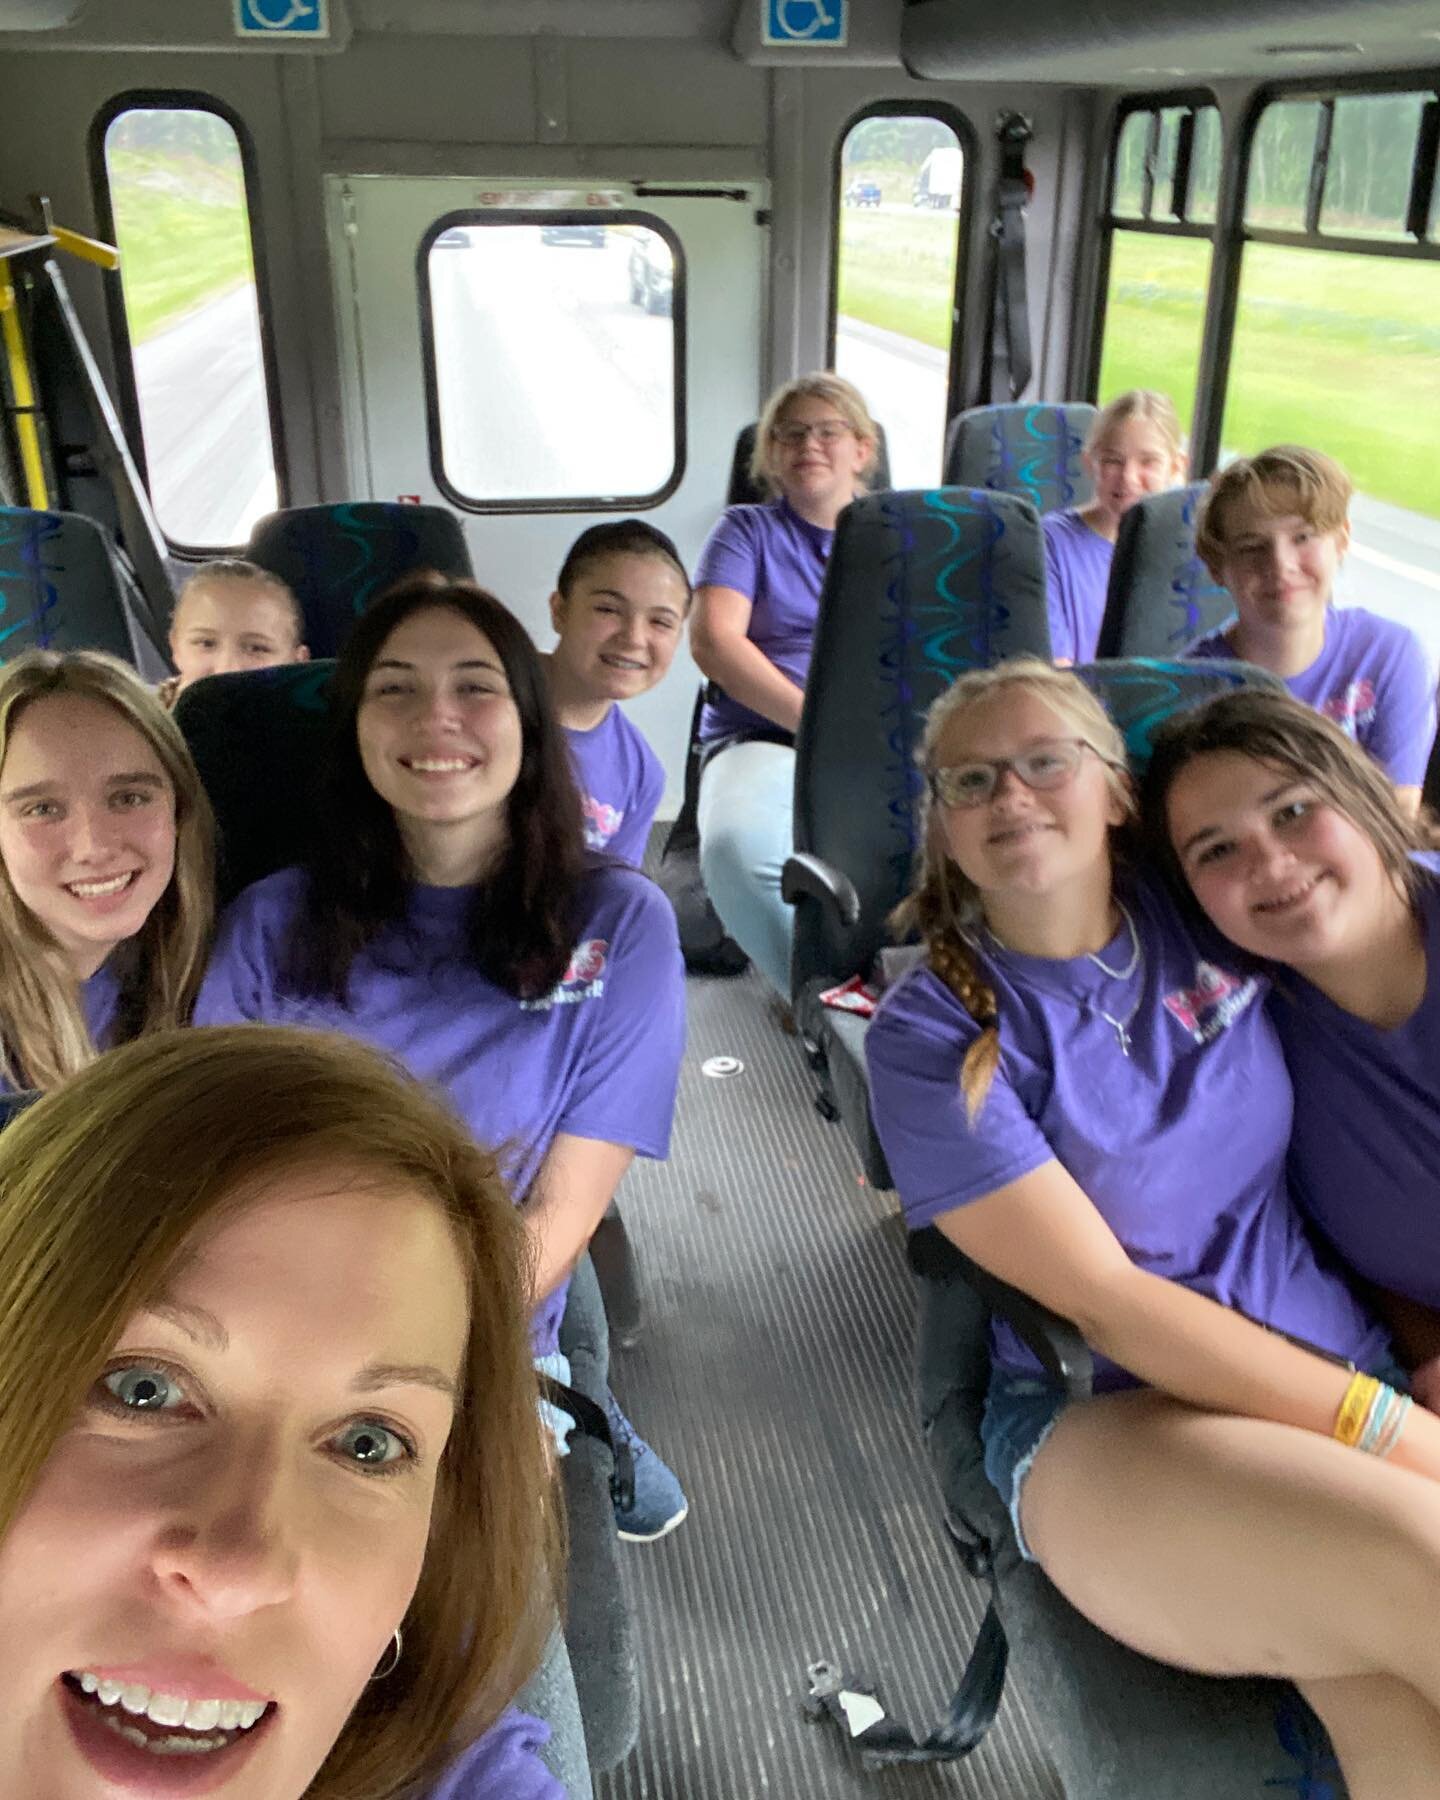 Palmetto Girls Sing is on the way to Carowinds to sing beautifully AND ride roller coasters! Wish us luck!